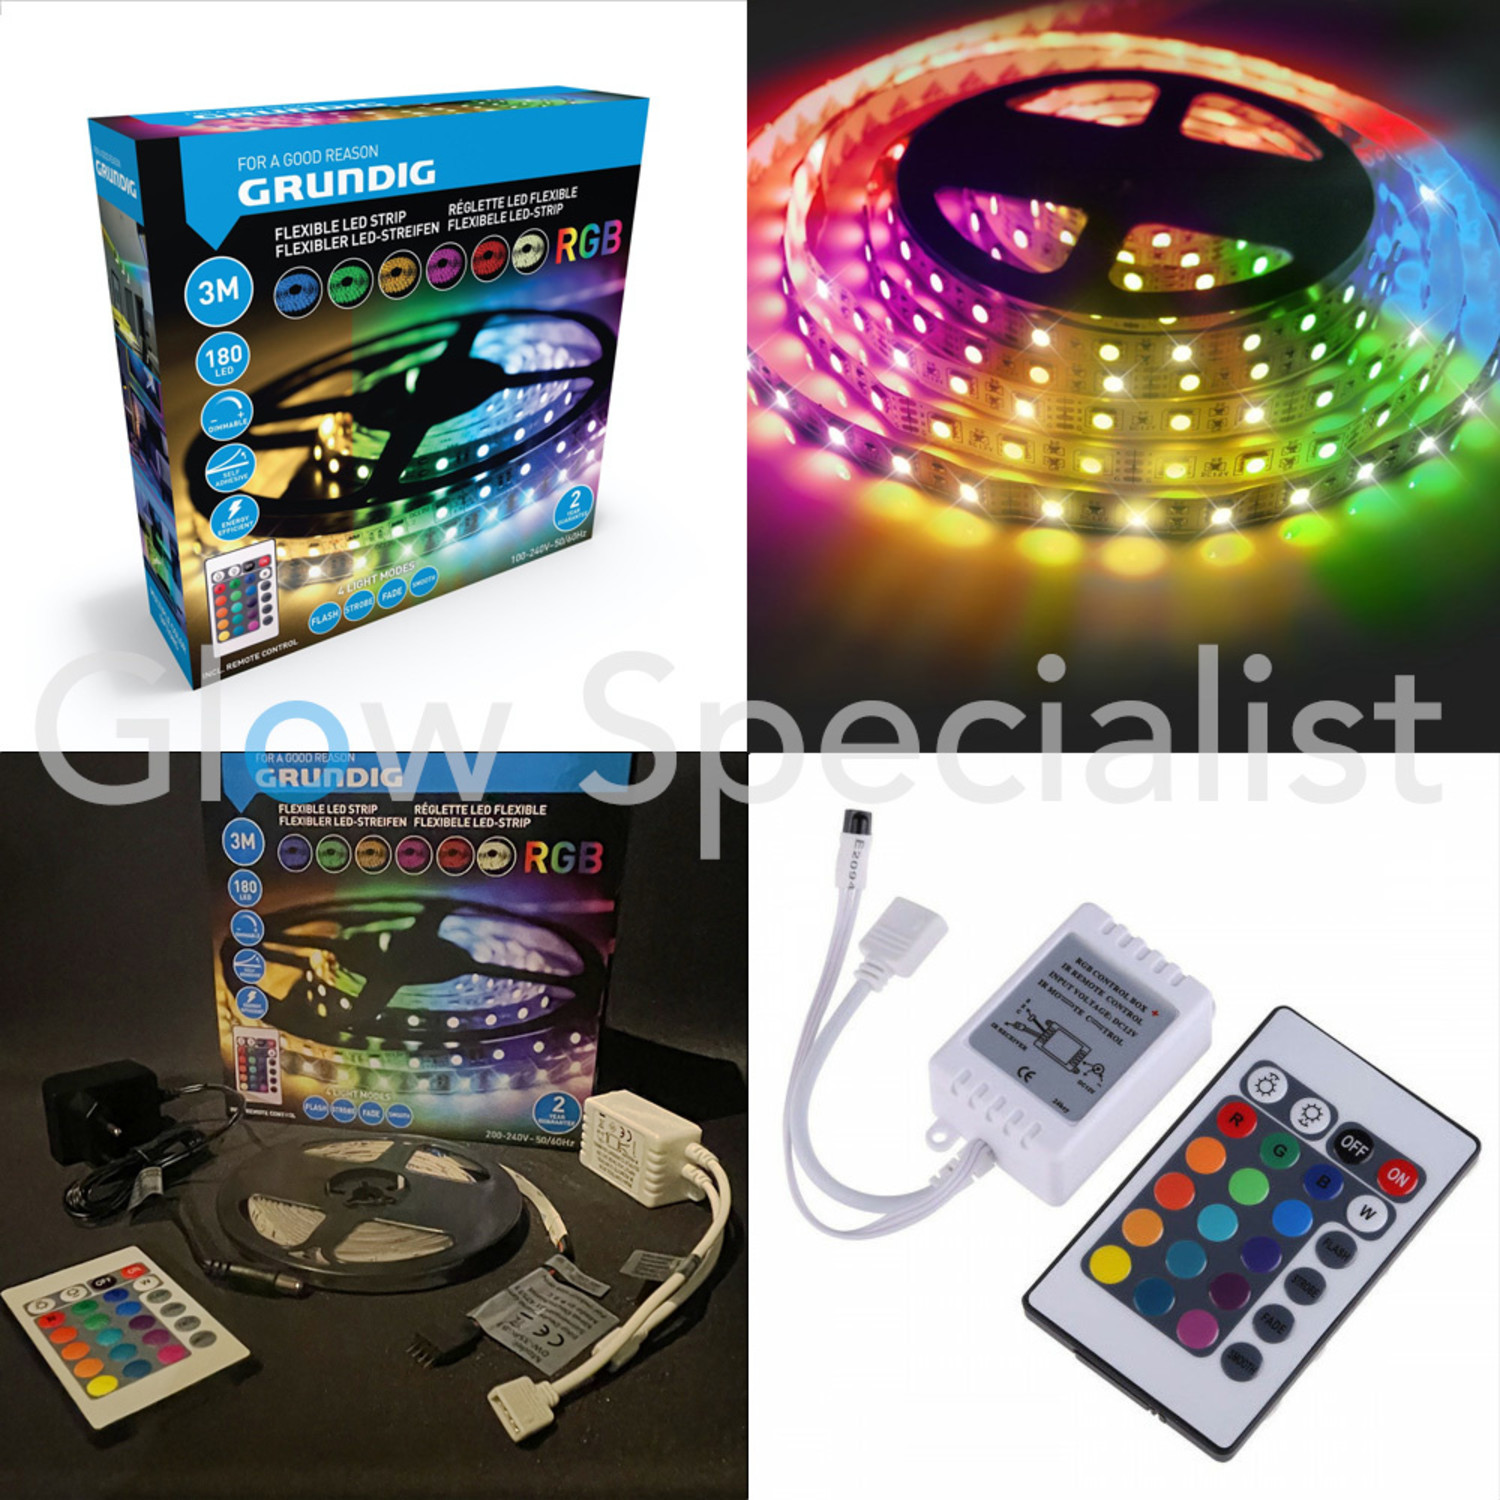 heet salade Idioot FLEXIBLE LED STRIP - 3 METER - 180 LED - MULTICOLOR - Glow Specialist -  Glow Specialist